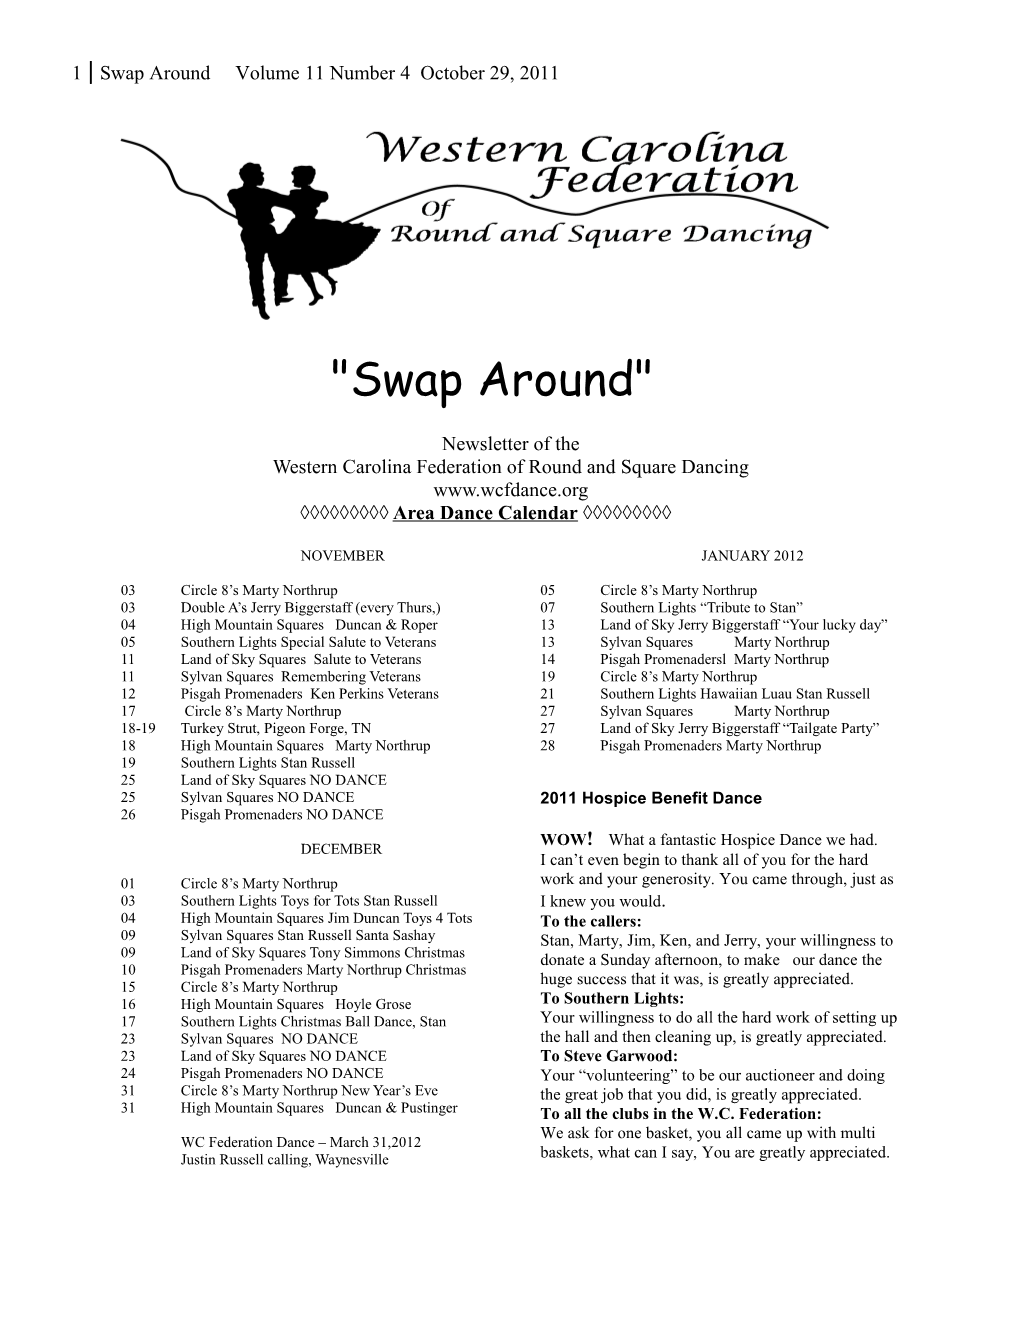 Western Carolina Federation of Round and Square Dancing